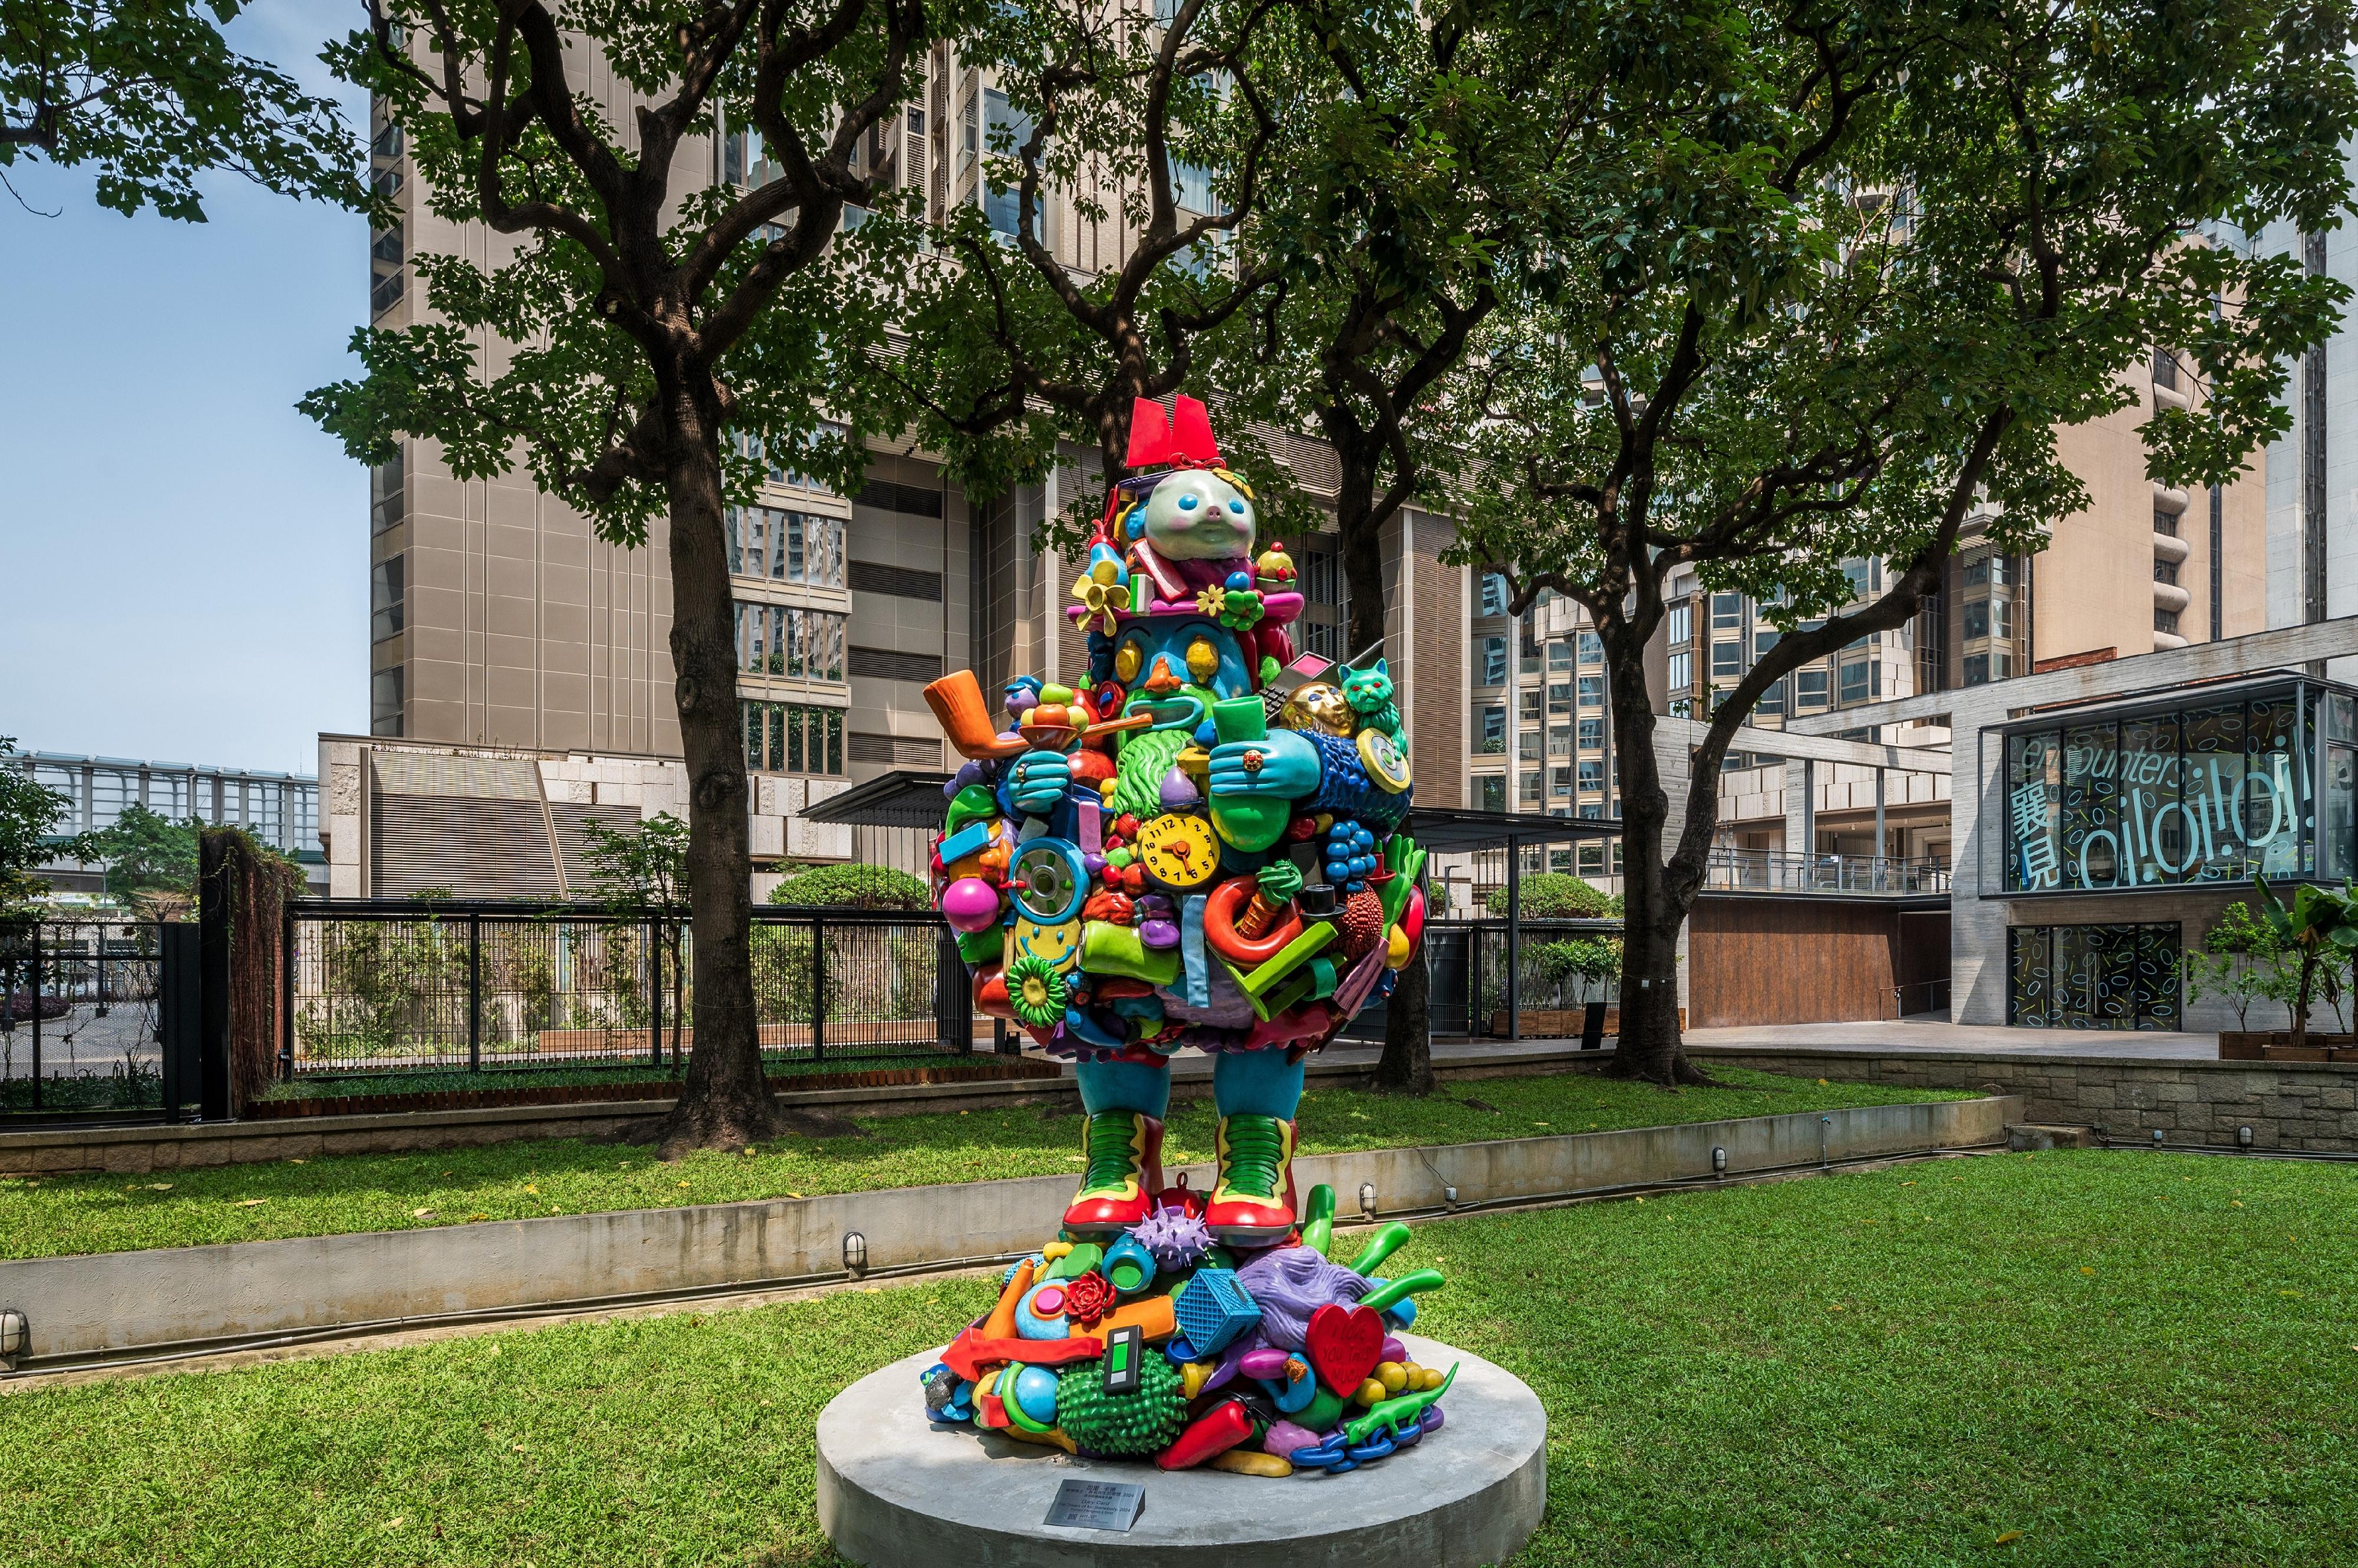 The new exhibition of the Oil Street Art Space (Oi!), "Oi! Spotlight: People Mountain People Sea by Gary Card", will be on display from tomorrow (March 20) to July 28. Photo shows the large-scale outdoor sculpture "The Dream of Mr. Somebody" at Oi! Lawn by British artist Gary Card.